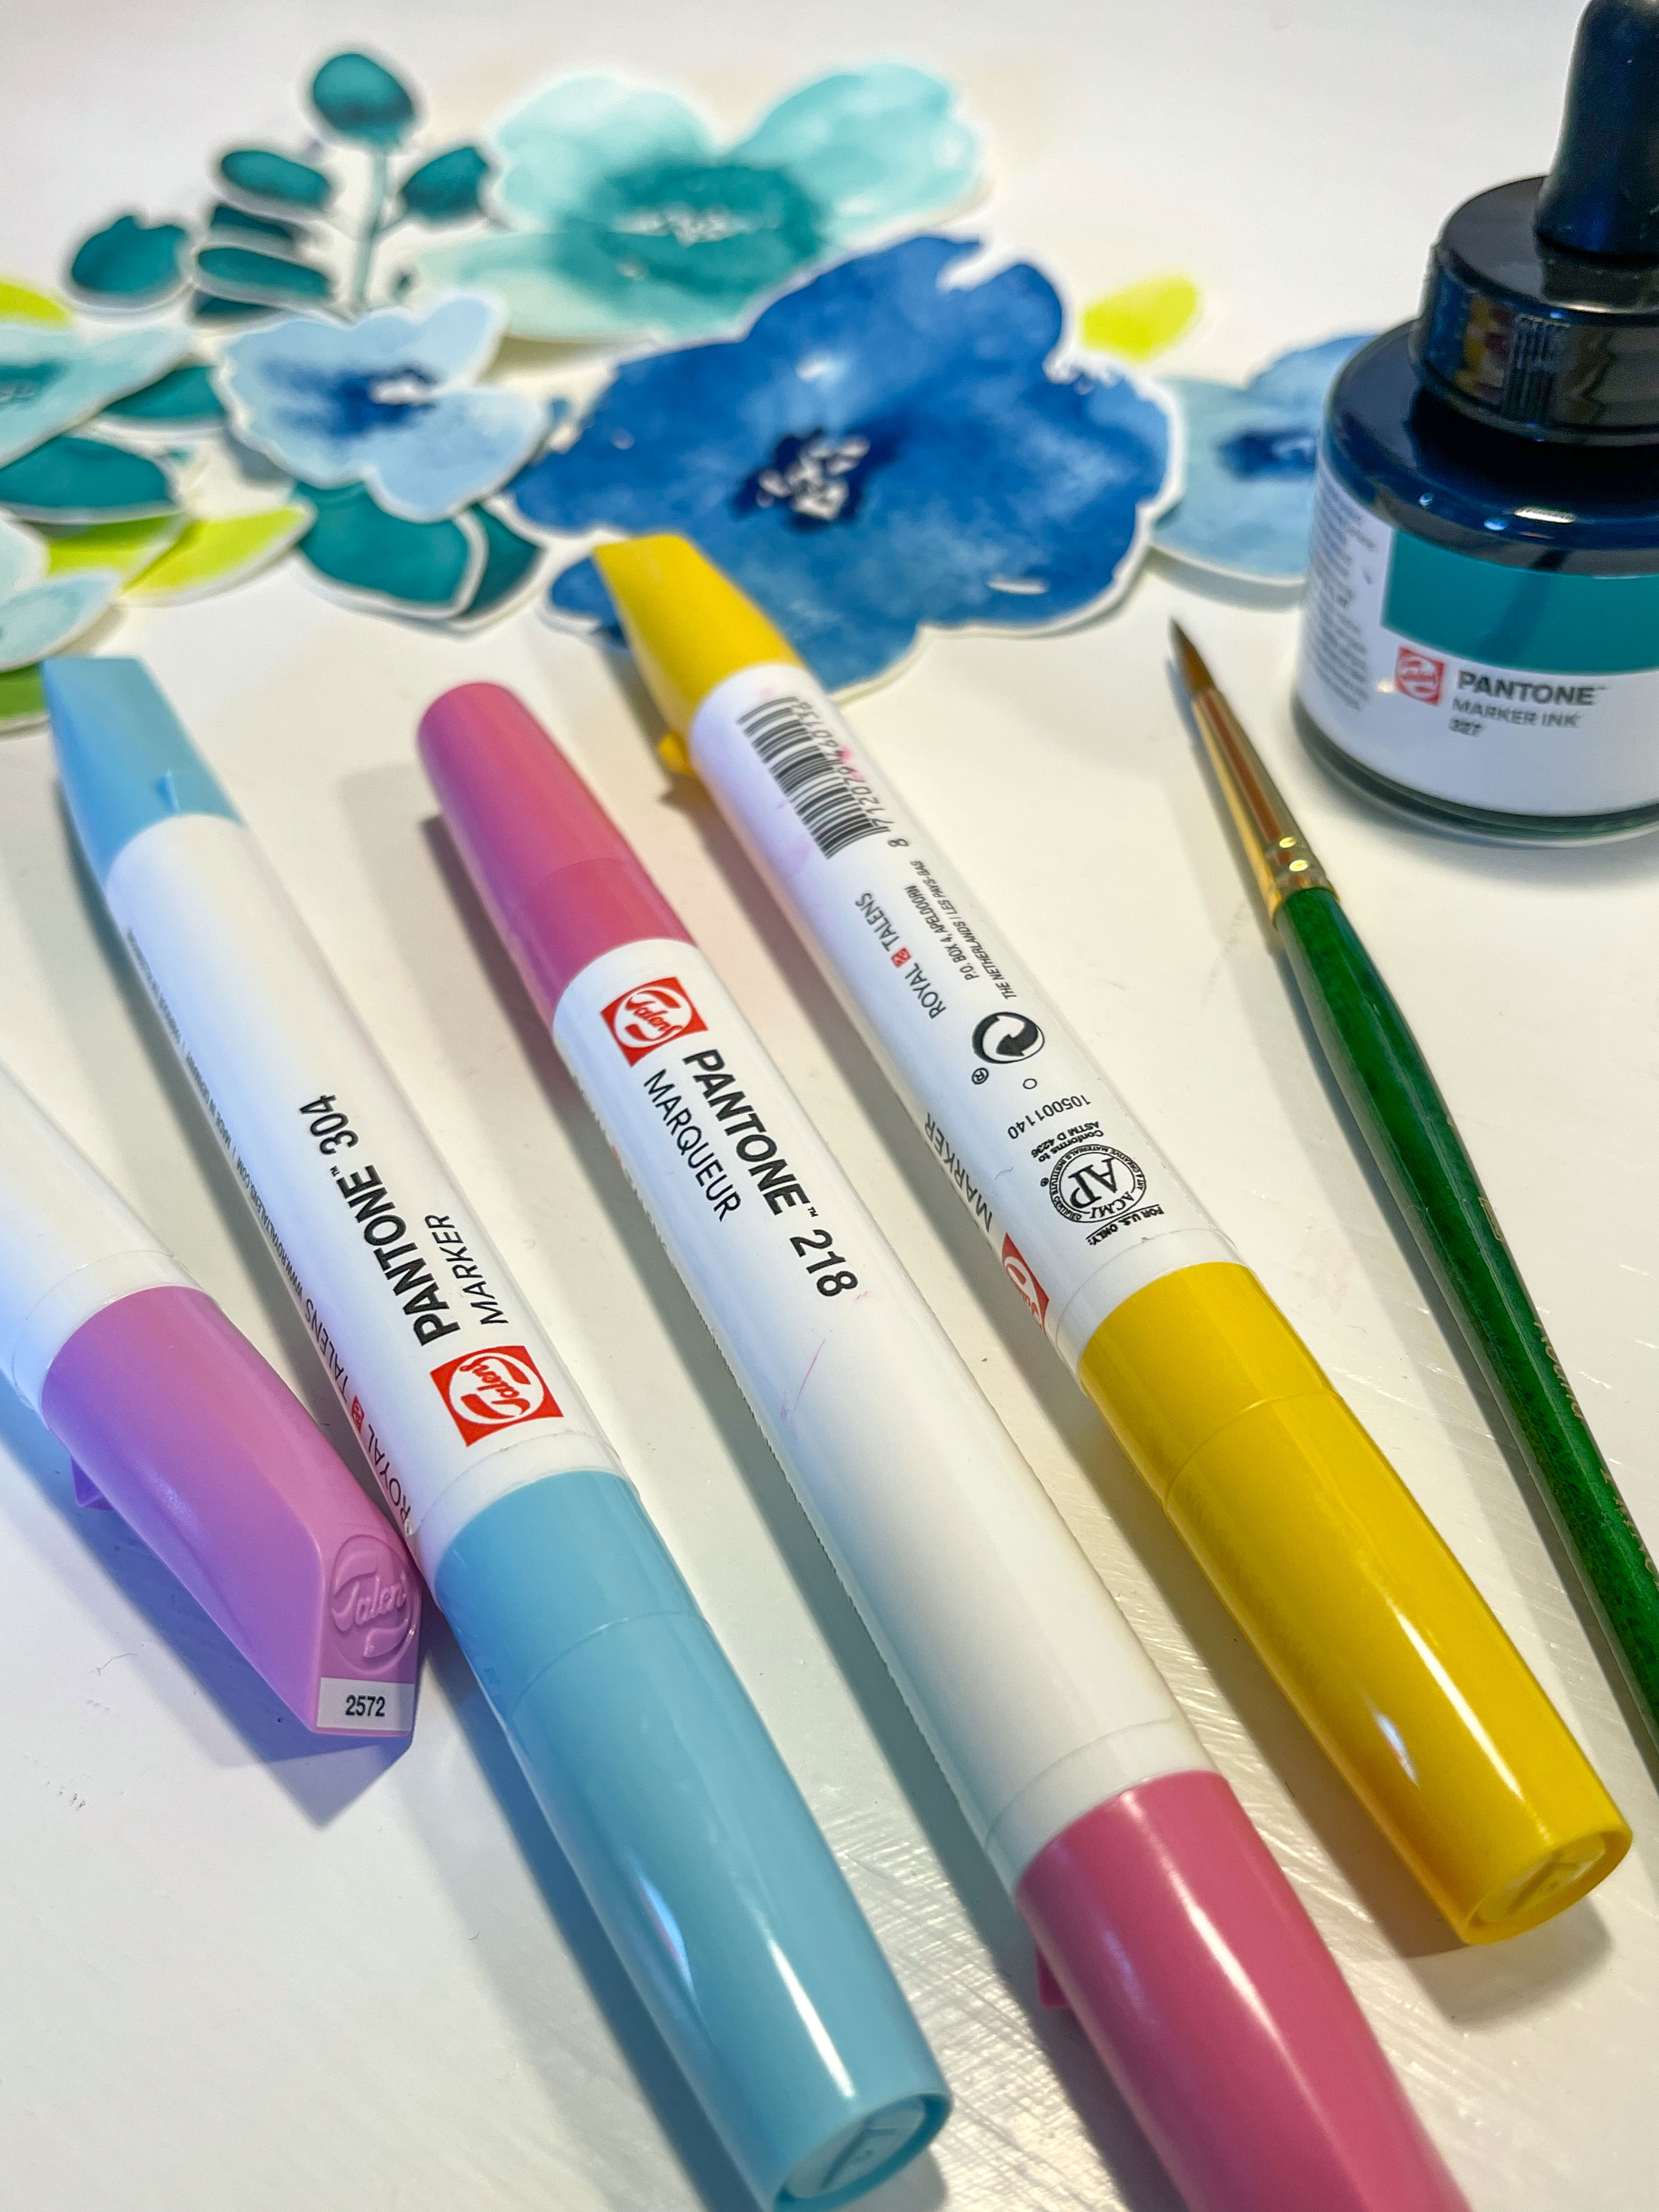 Get Creative with the New Royal Talens Markers by Pantone – Heidi Cogdill